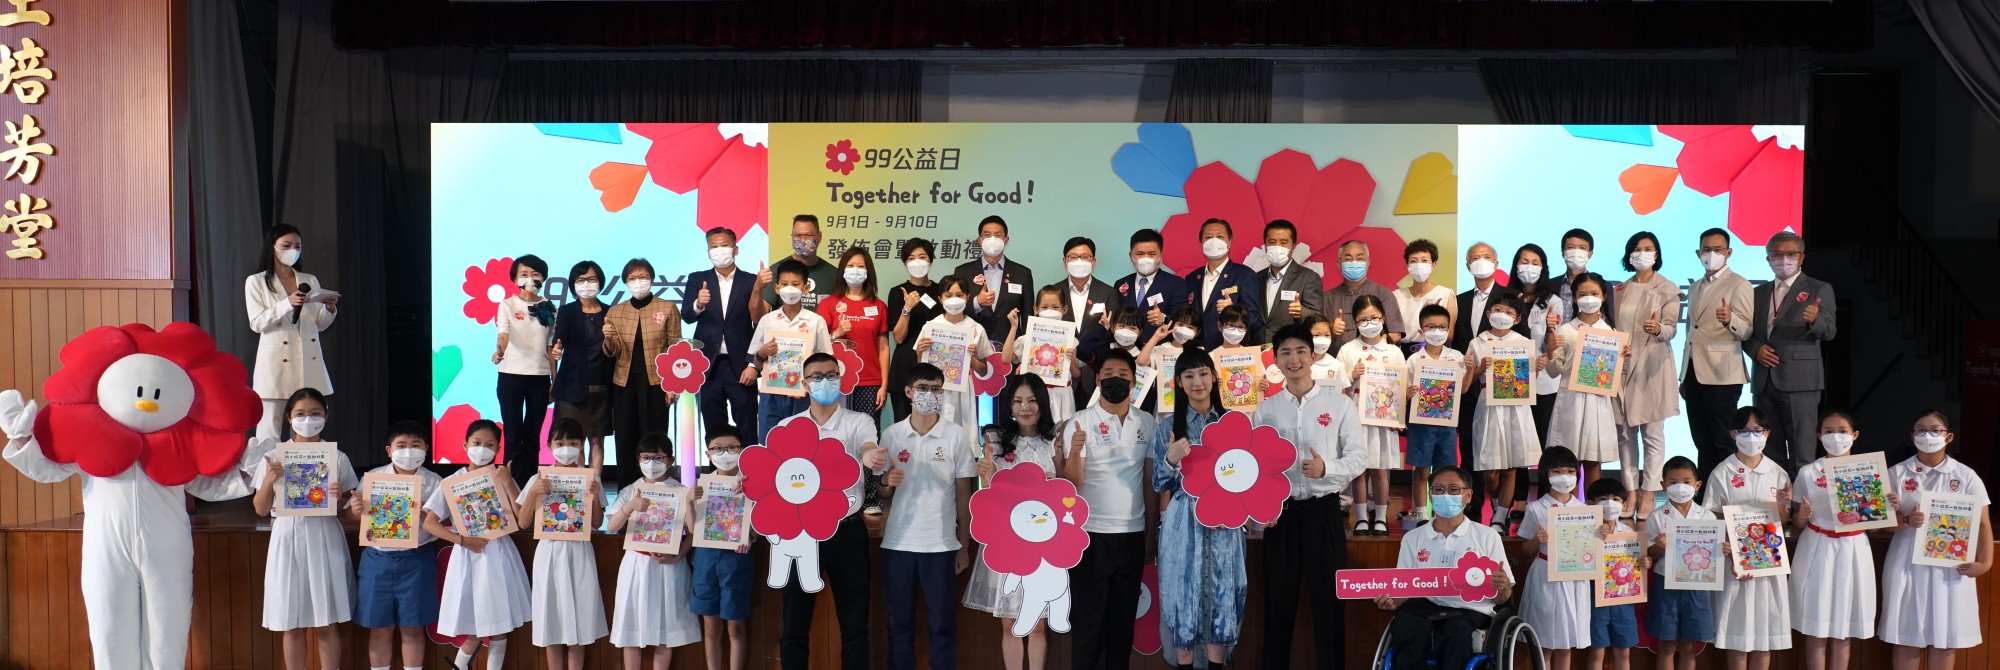 Tencent Launches Its “99 Giving Day” Annual Charity Campaign in Hong Kong - Tencent 腾讯